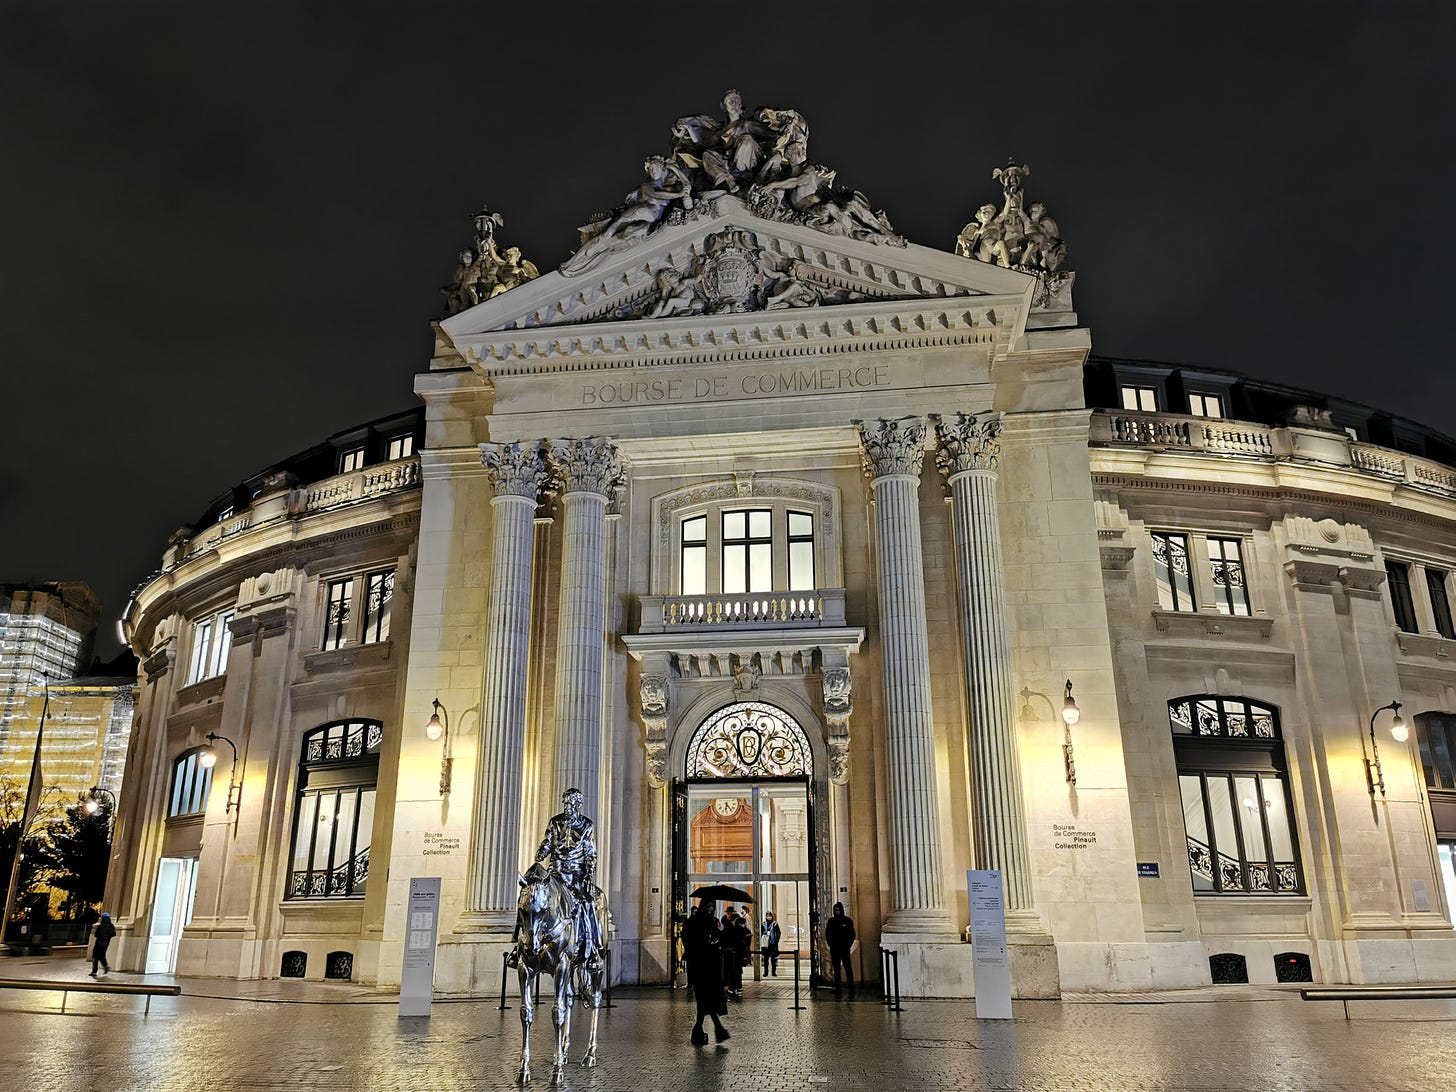 Bourse de Commerce, home of the Pinault Collection